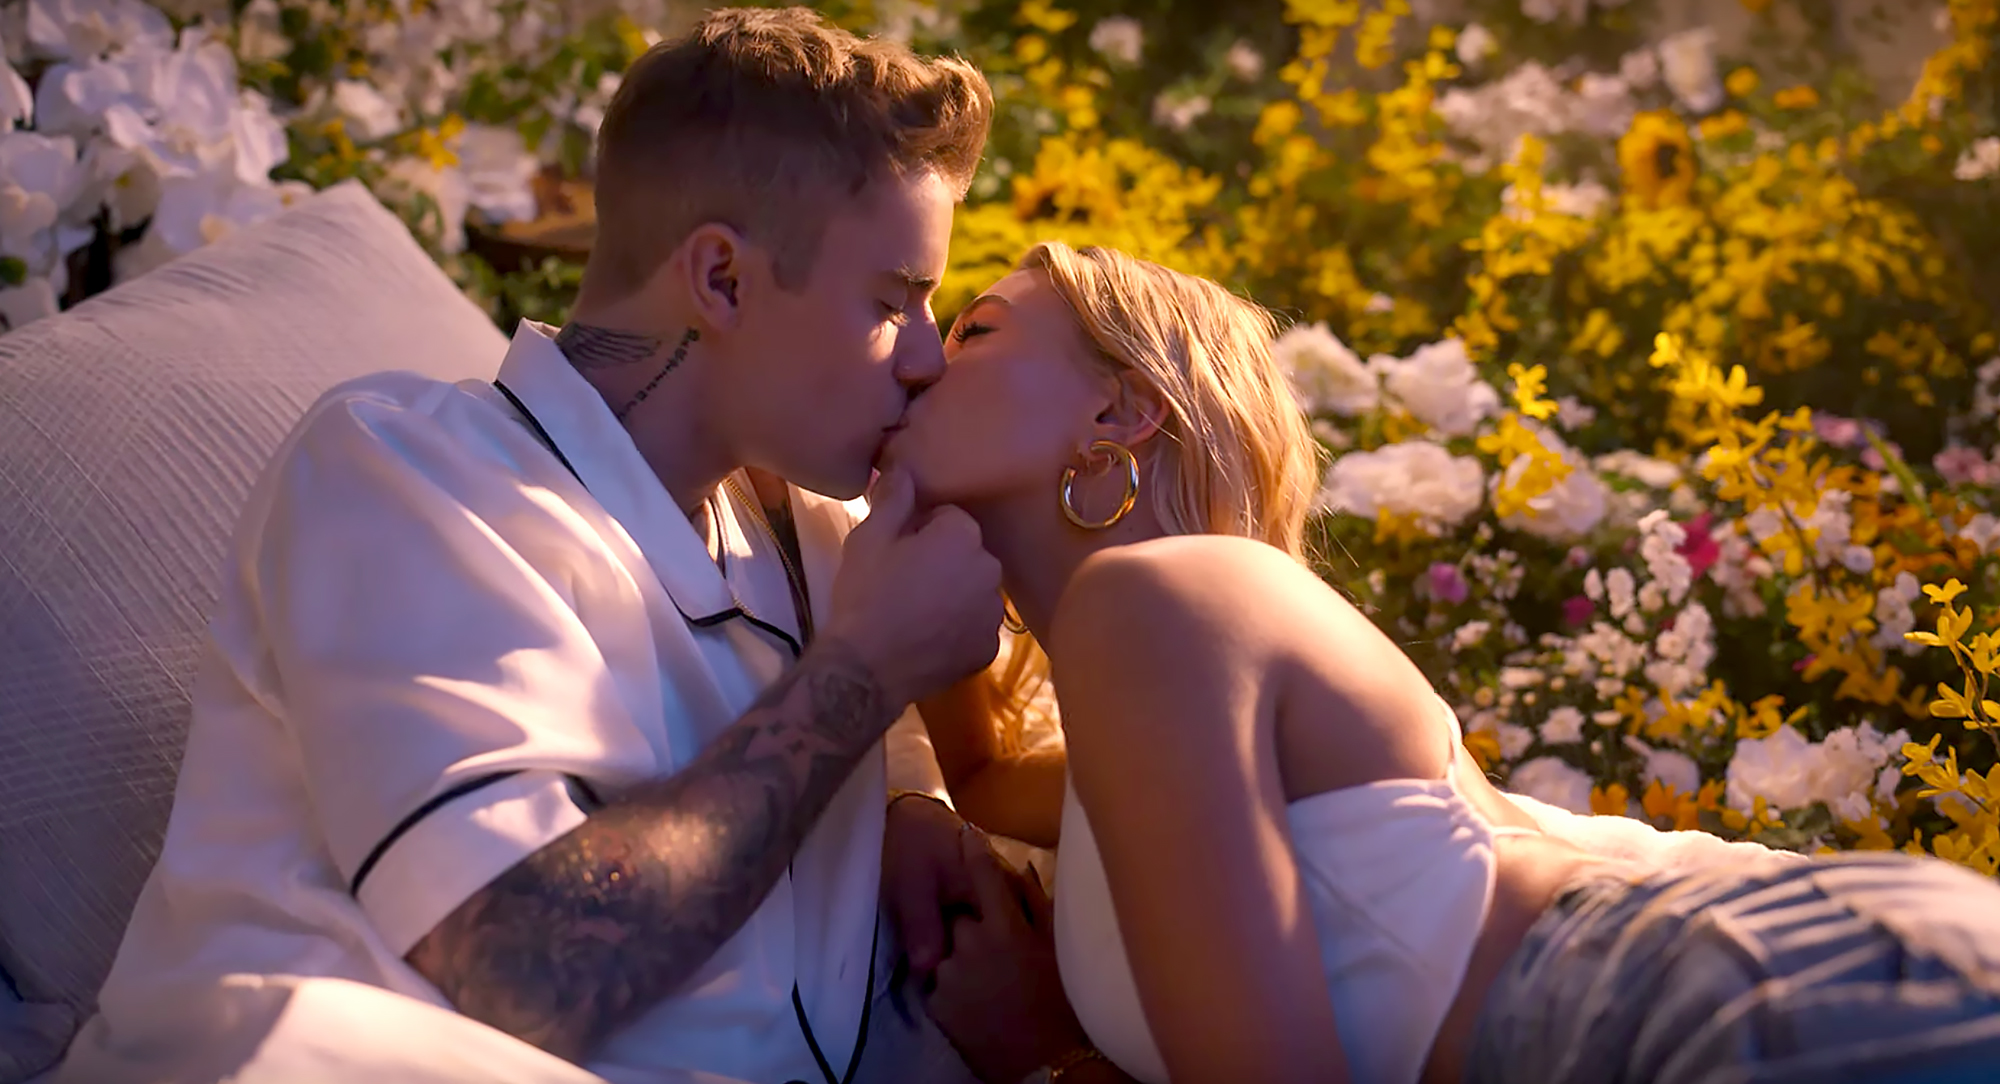 Hailey Bieber Thinks She Is The Muse Of Her Husband Justin Bieber's Albums,  But Does He Think So? An Old Video Resurfaces When He Claimed His Ex-GF  (Selena Gomez) Was His Inspiration!